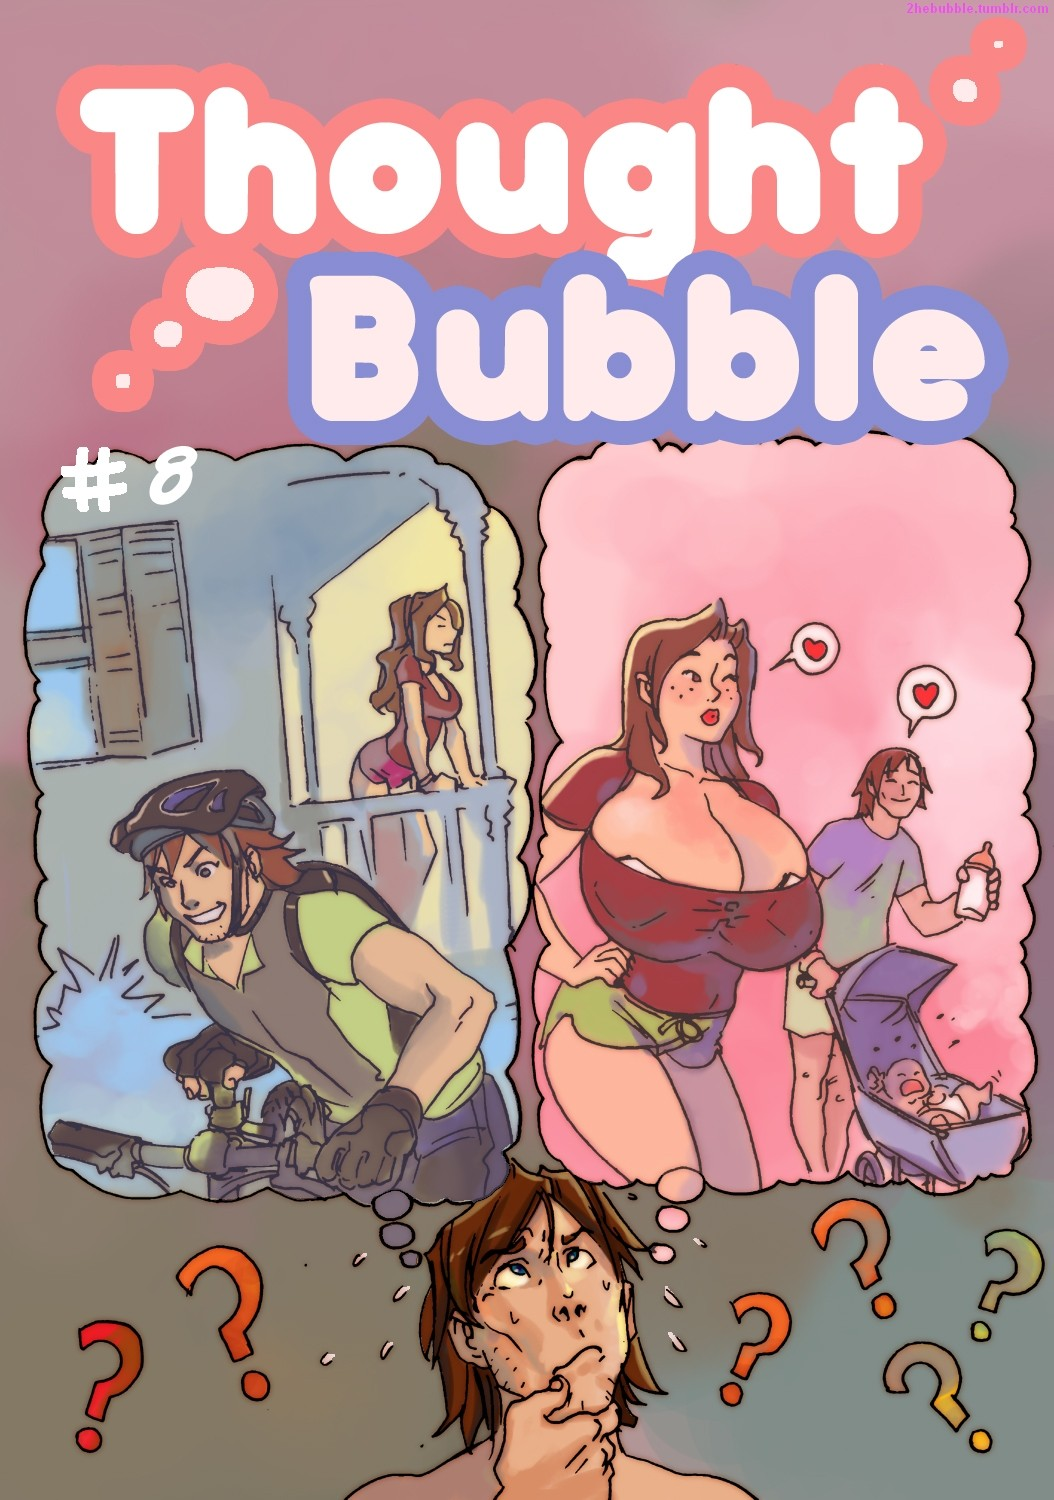 SIDNEYMT - THOUGHT BUBBLE 8